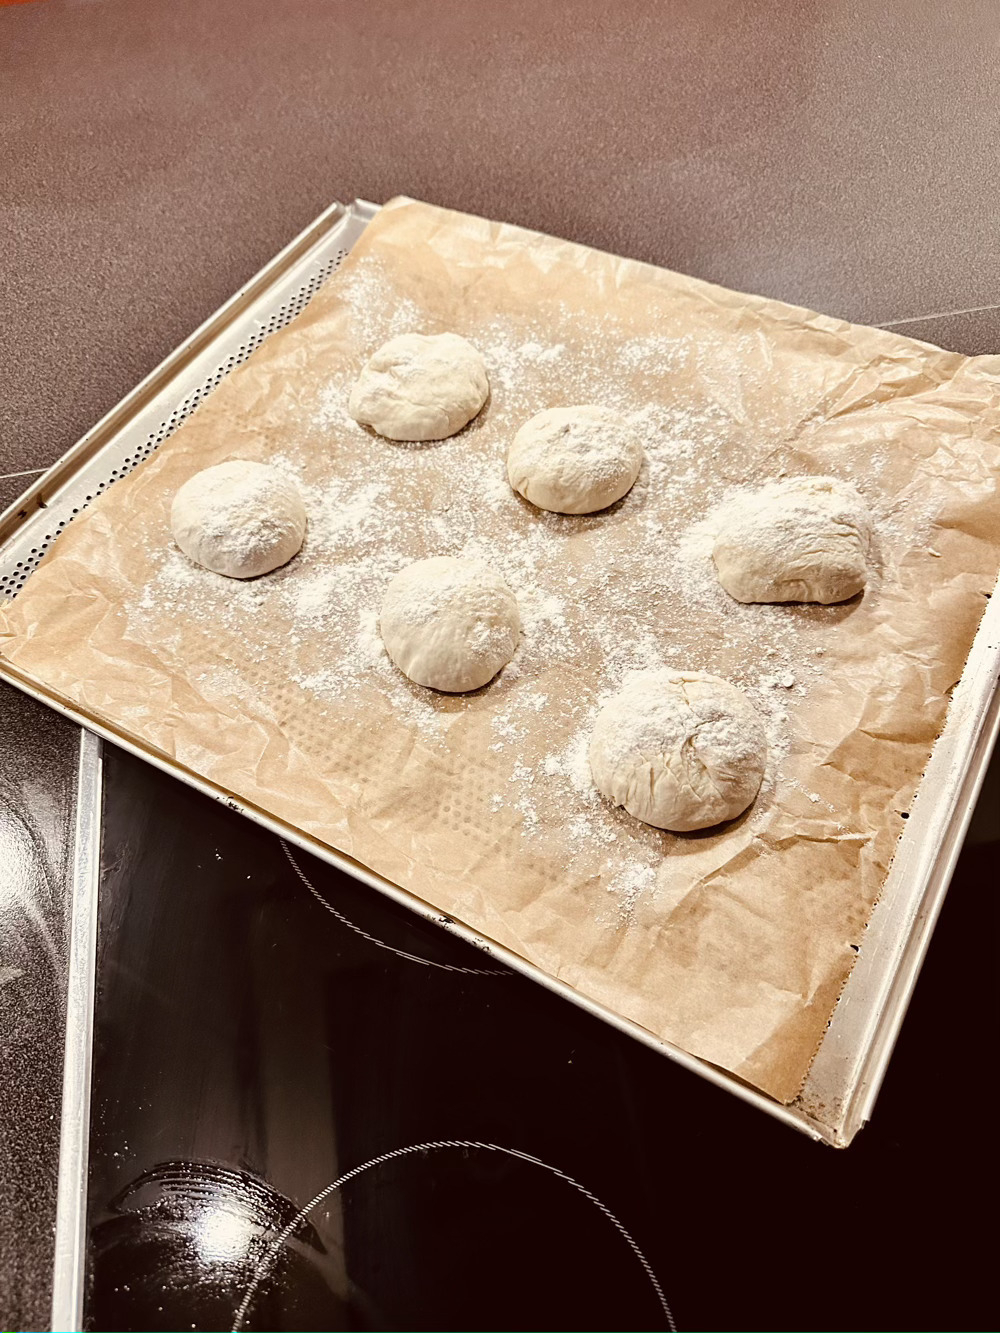 6 dough balls proofing on a rack, raising to the occasion 